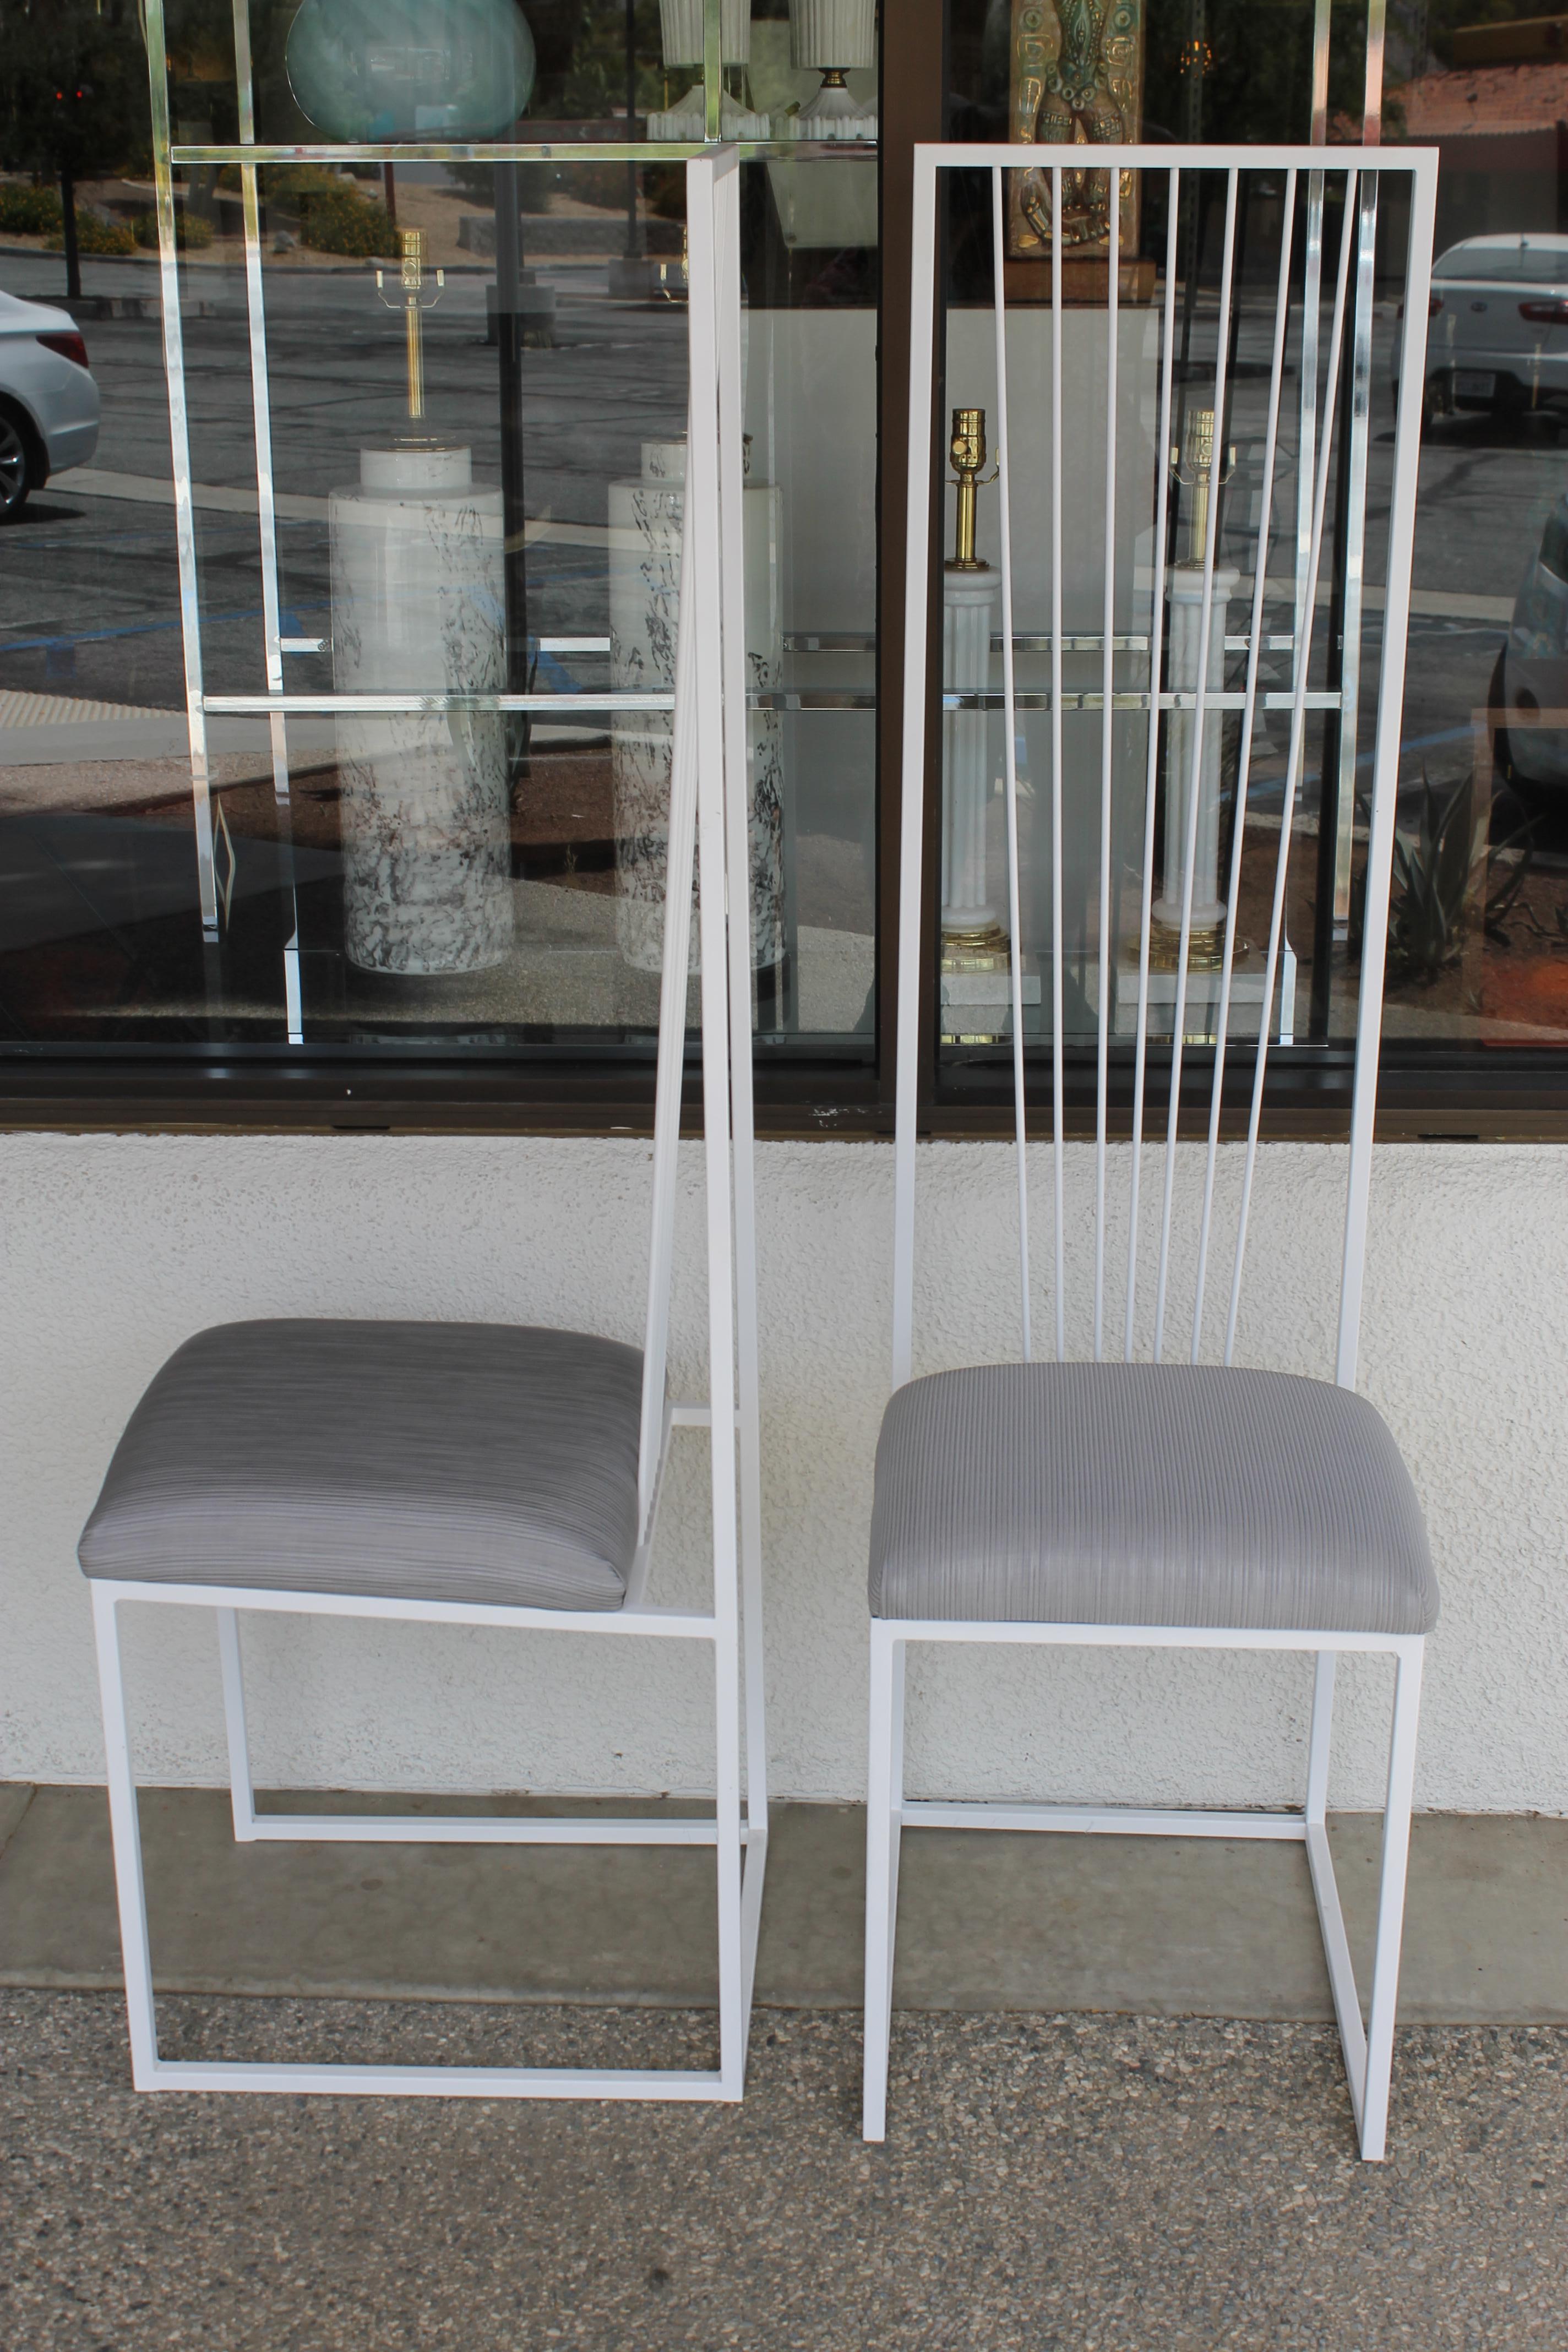 Four high back chairs covered in Sunbrella fabric. We had these chairs sand blasted and powder coated in satin white. Can be used either inside or out. Each chair measures 15